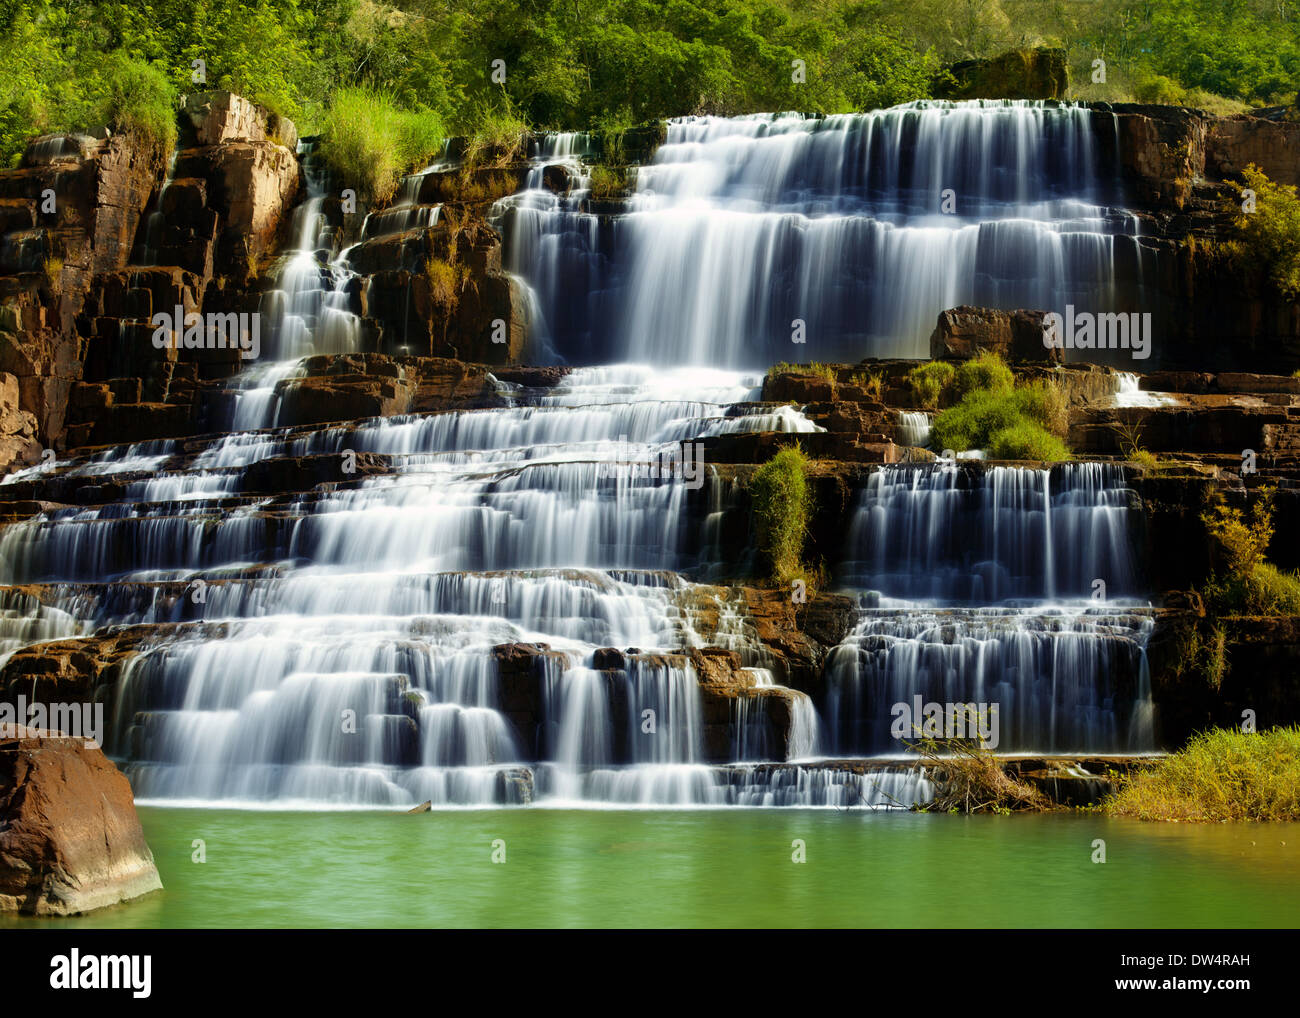 Tropical rainforest landscape with flowing Pongour waterfall in Vietnam. Four images panorama Stock Photo